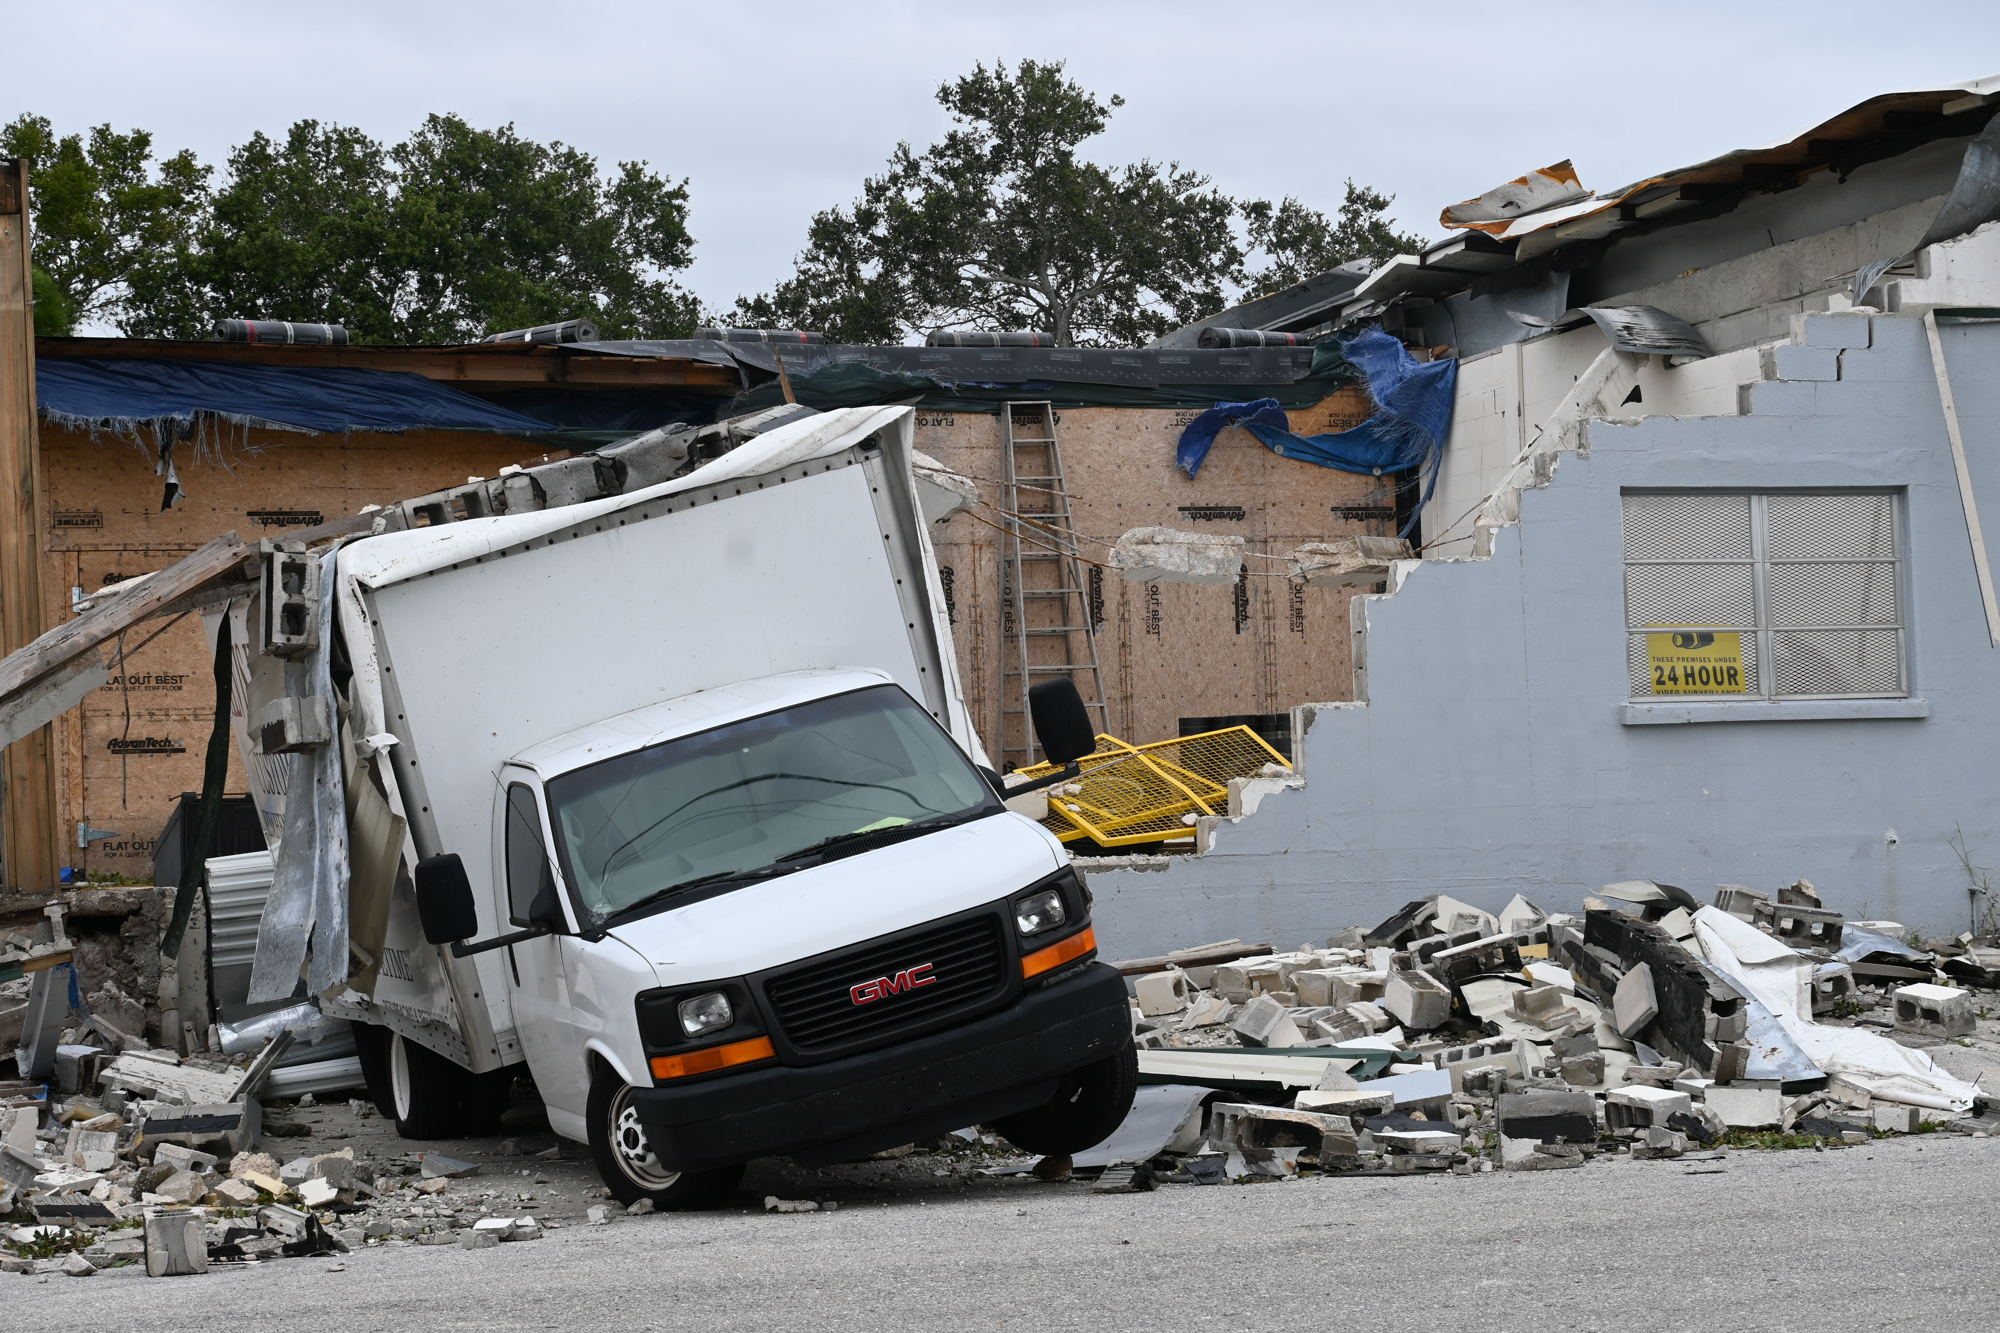 A building on 10th Street near downtown Sarasota collapsed Wednesday evening. (Photo by Spencer Fordin)